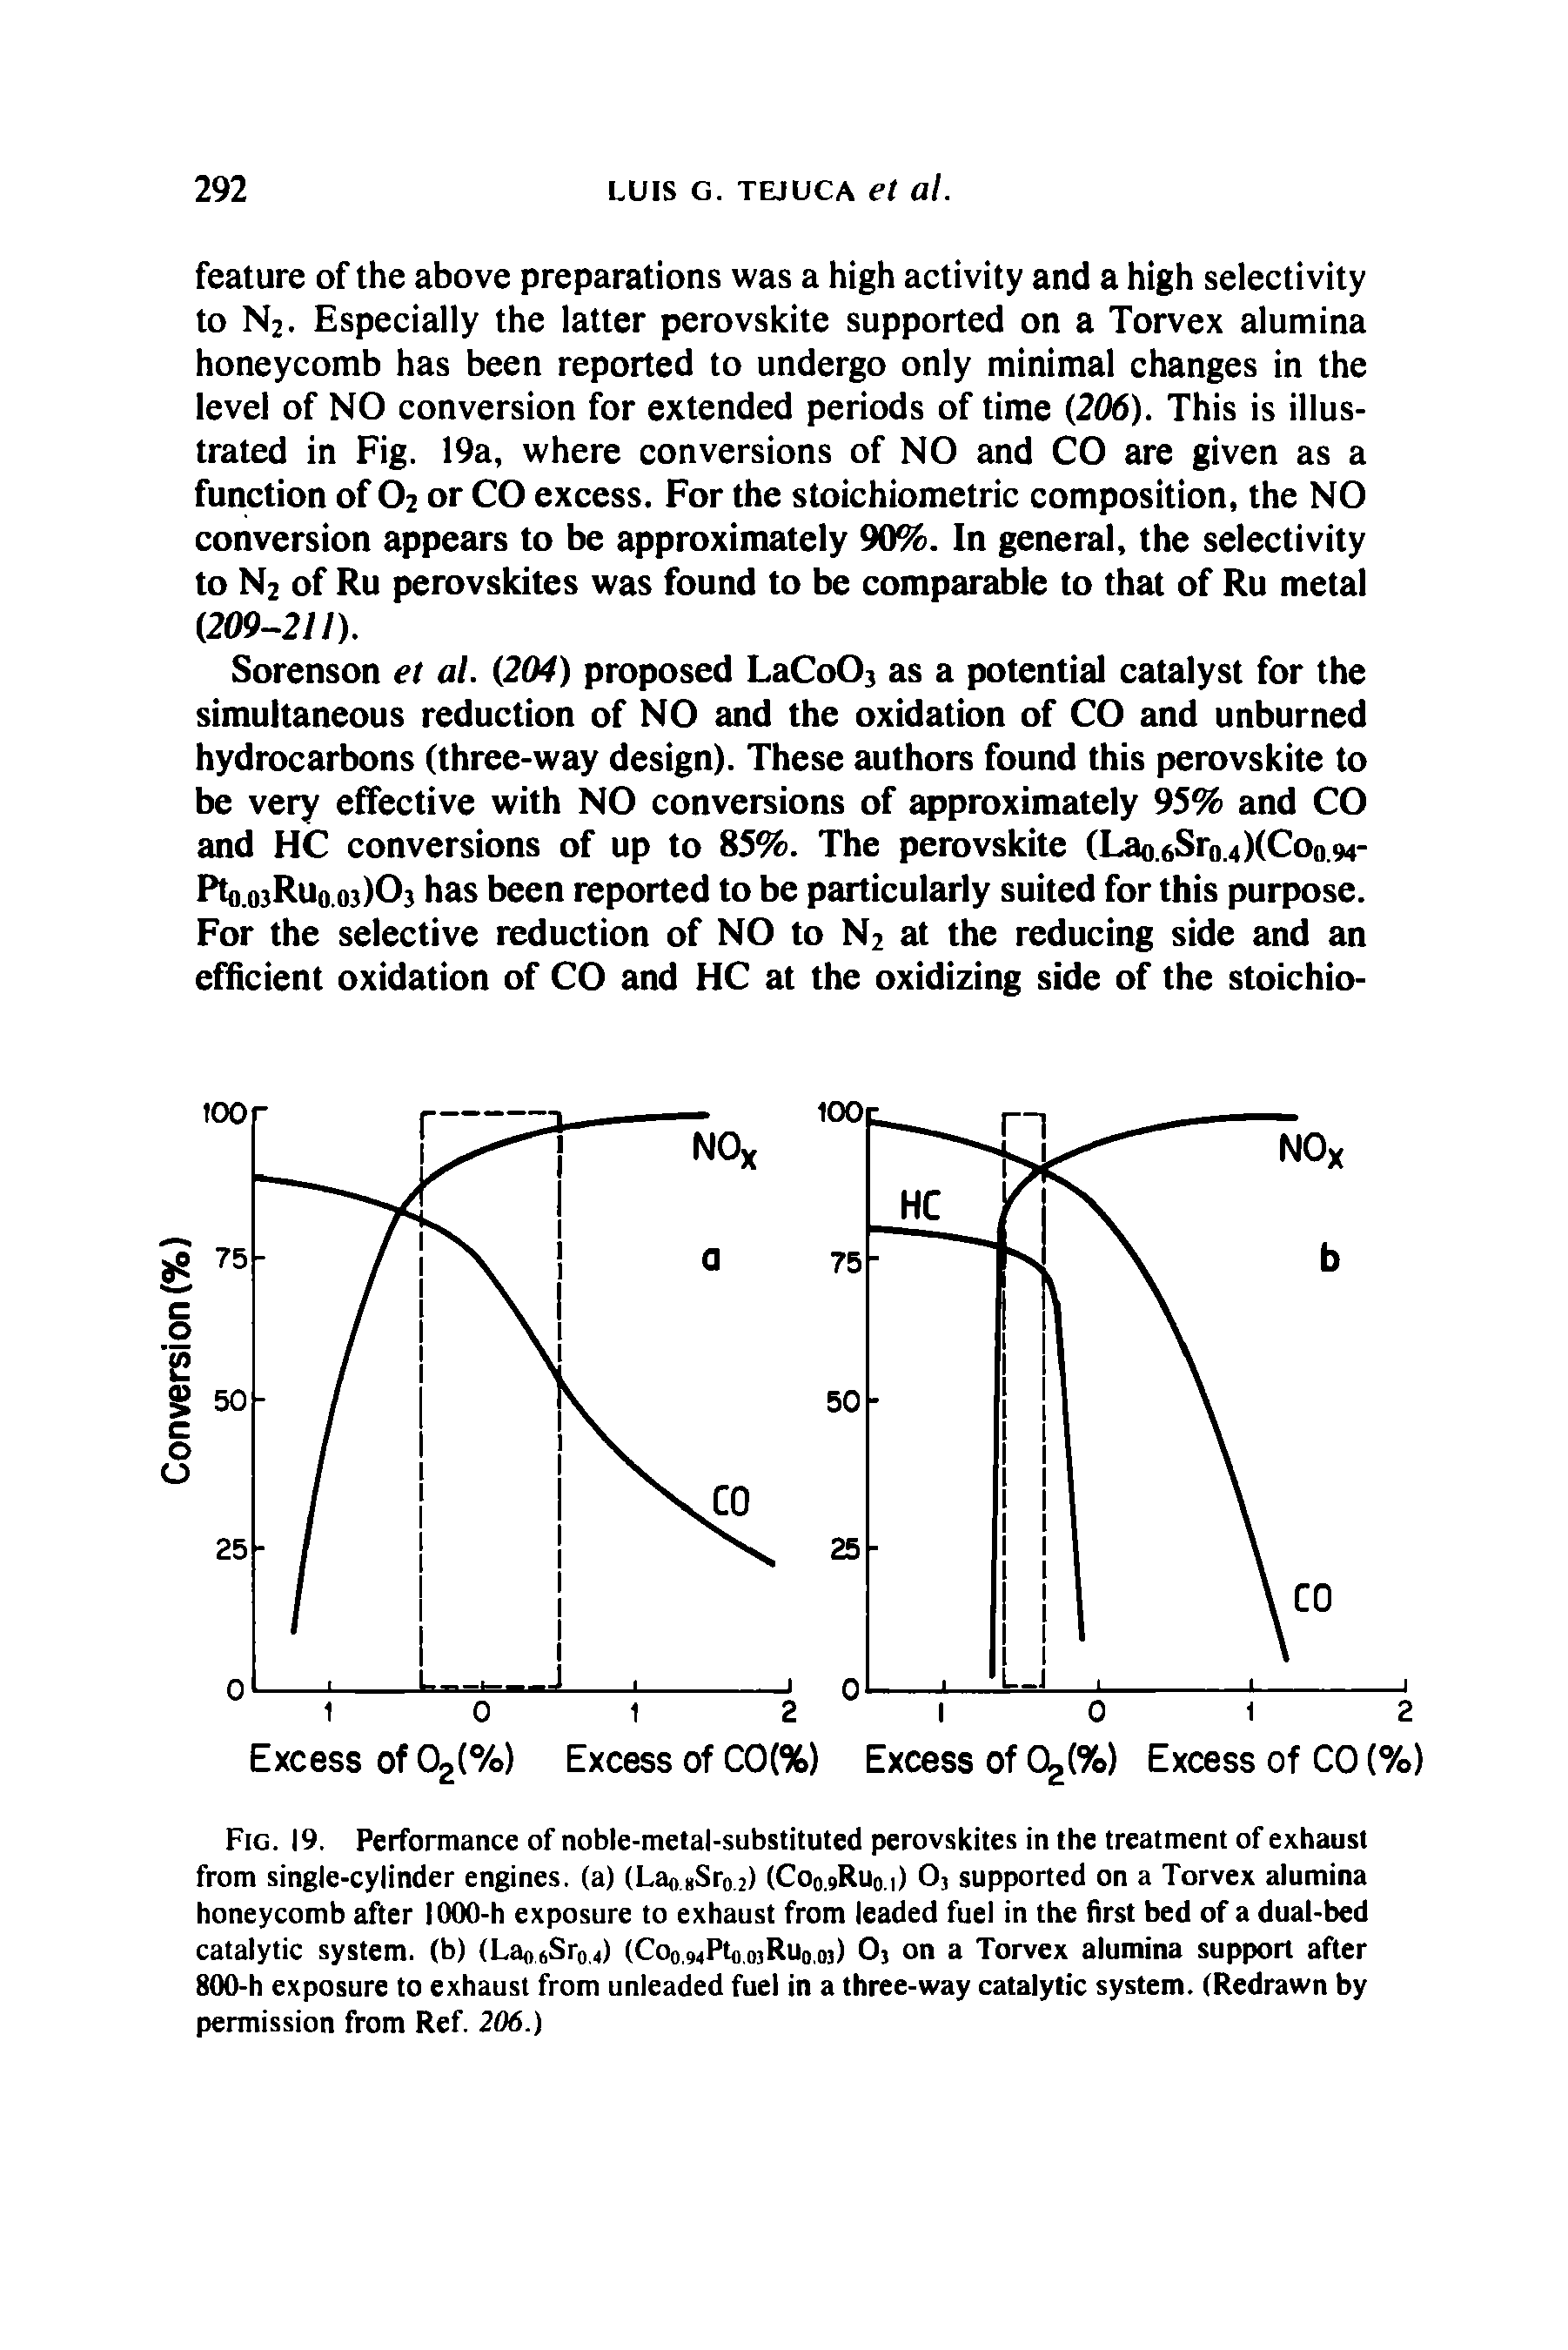 Fig. 19. Performance of noble-metal-substituted perovskites in the treatment of exhaust from single-cylinder engines, (a) (LaonSr02) (Coo.9Ruoi) Oj supported on a Torvex alumina honeycomb after 1000-h exposure to exhaust from leaded fuel in the first bed of a dual-bed catalytic system, (b) (Lao6Sr04) (Coo.94Ptfl.ojRuo.03) Oj on a Torvex alumina support after 800-h exposure to exhaust from unleaded fuel in a three-way catalytic system. (Redrawn by permission from Ref. 206.)...